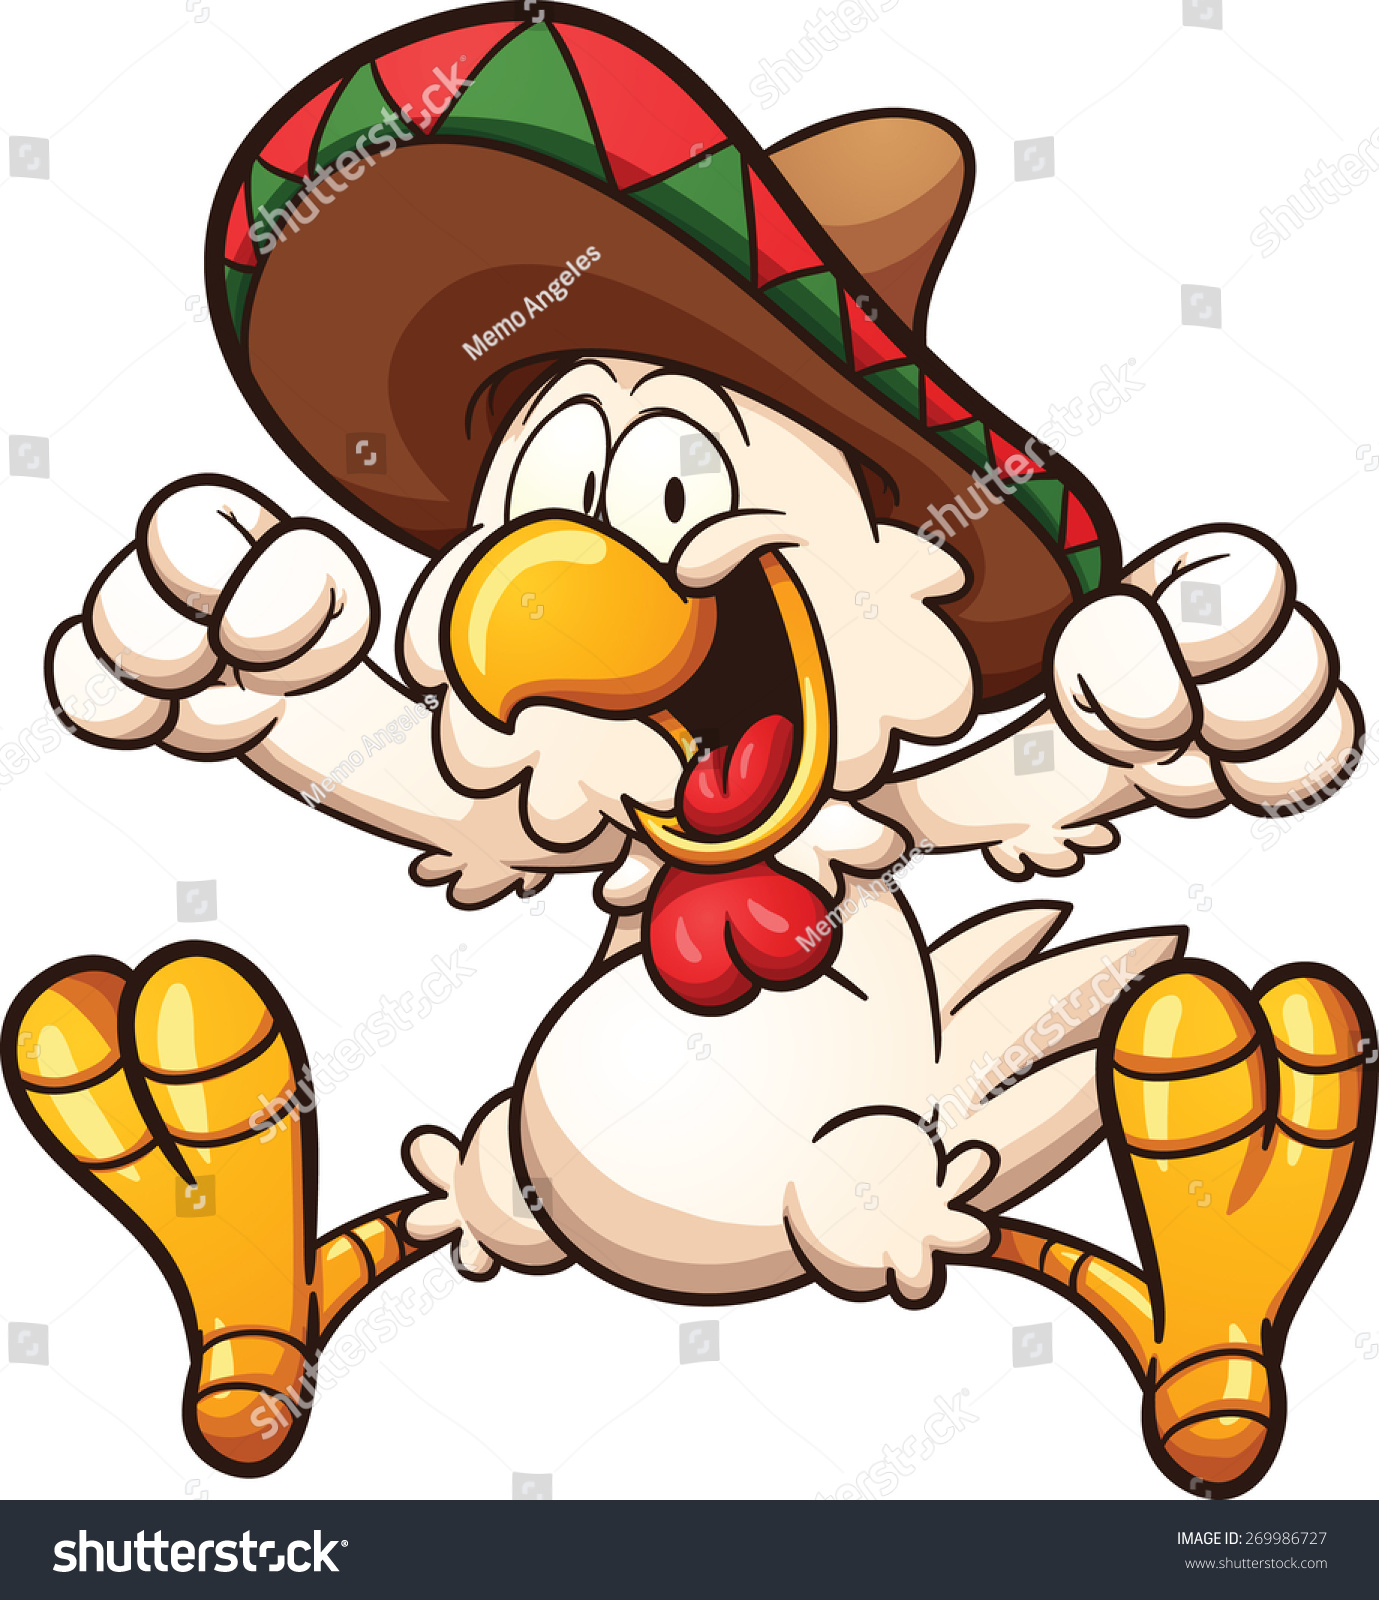 stock-vector-cartoon-chicken-with-mexican-sombrero-vector-clip-art-illustration-with-simple-gradients-all-in-a-269986727.jpg